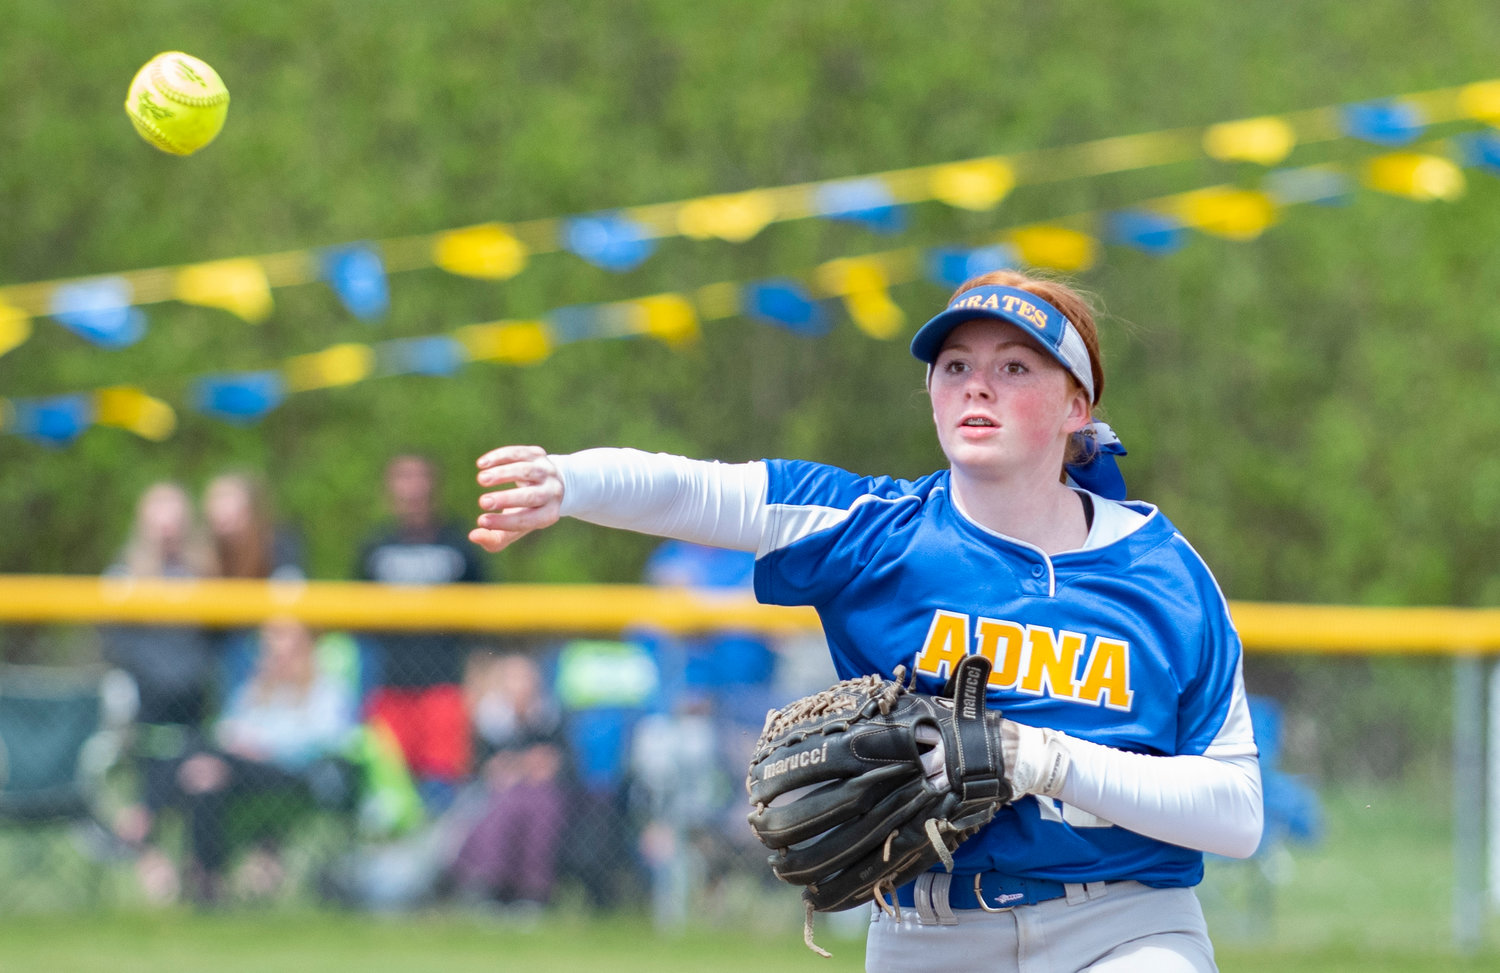 Adna second baseman Natalie Loose makes a throw to first base on Saturday.